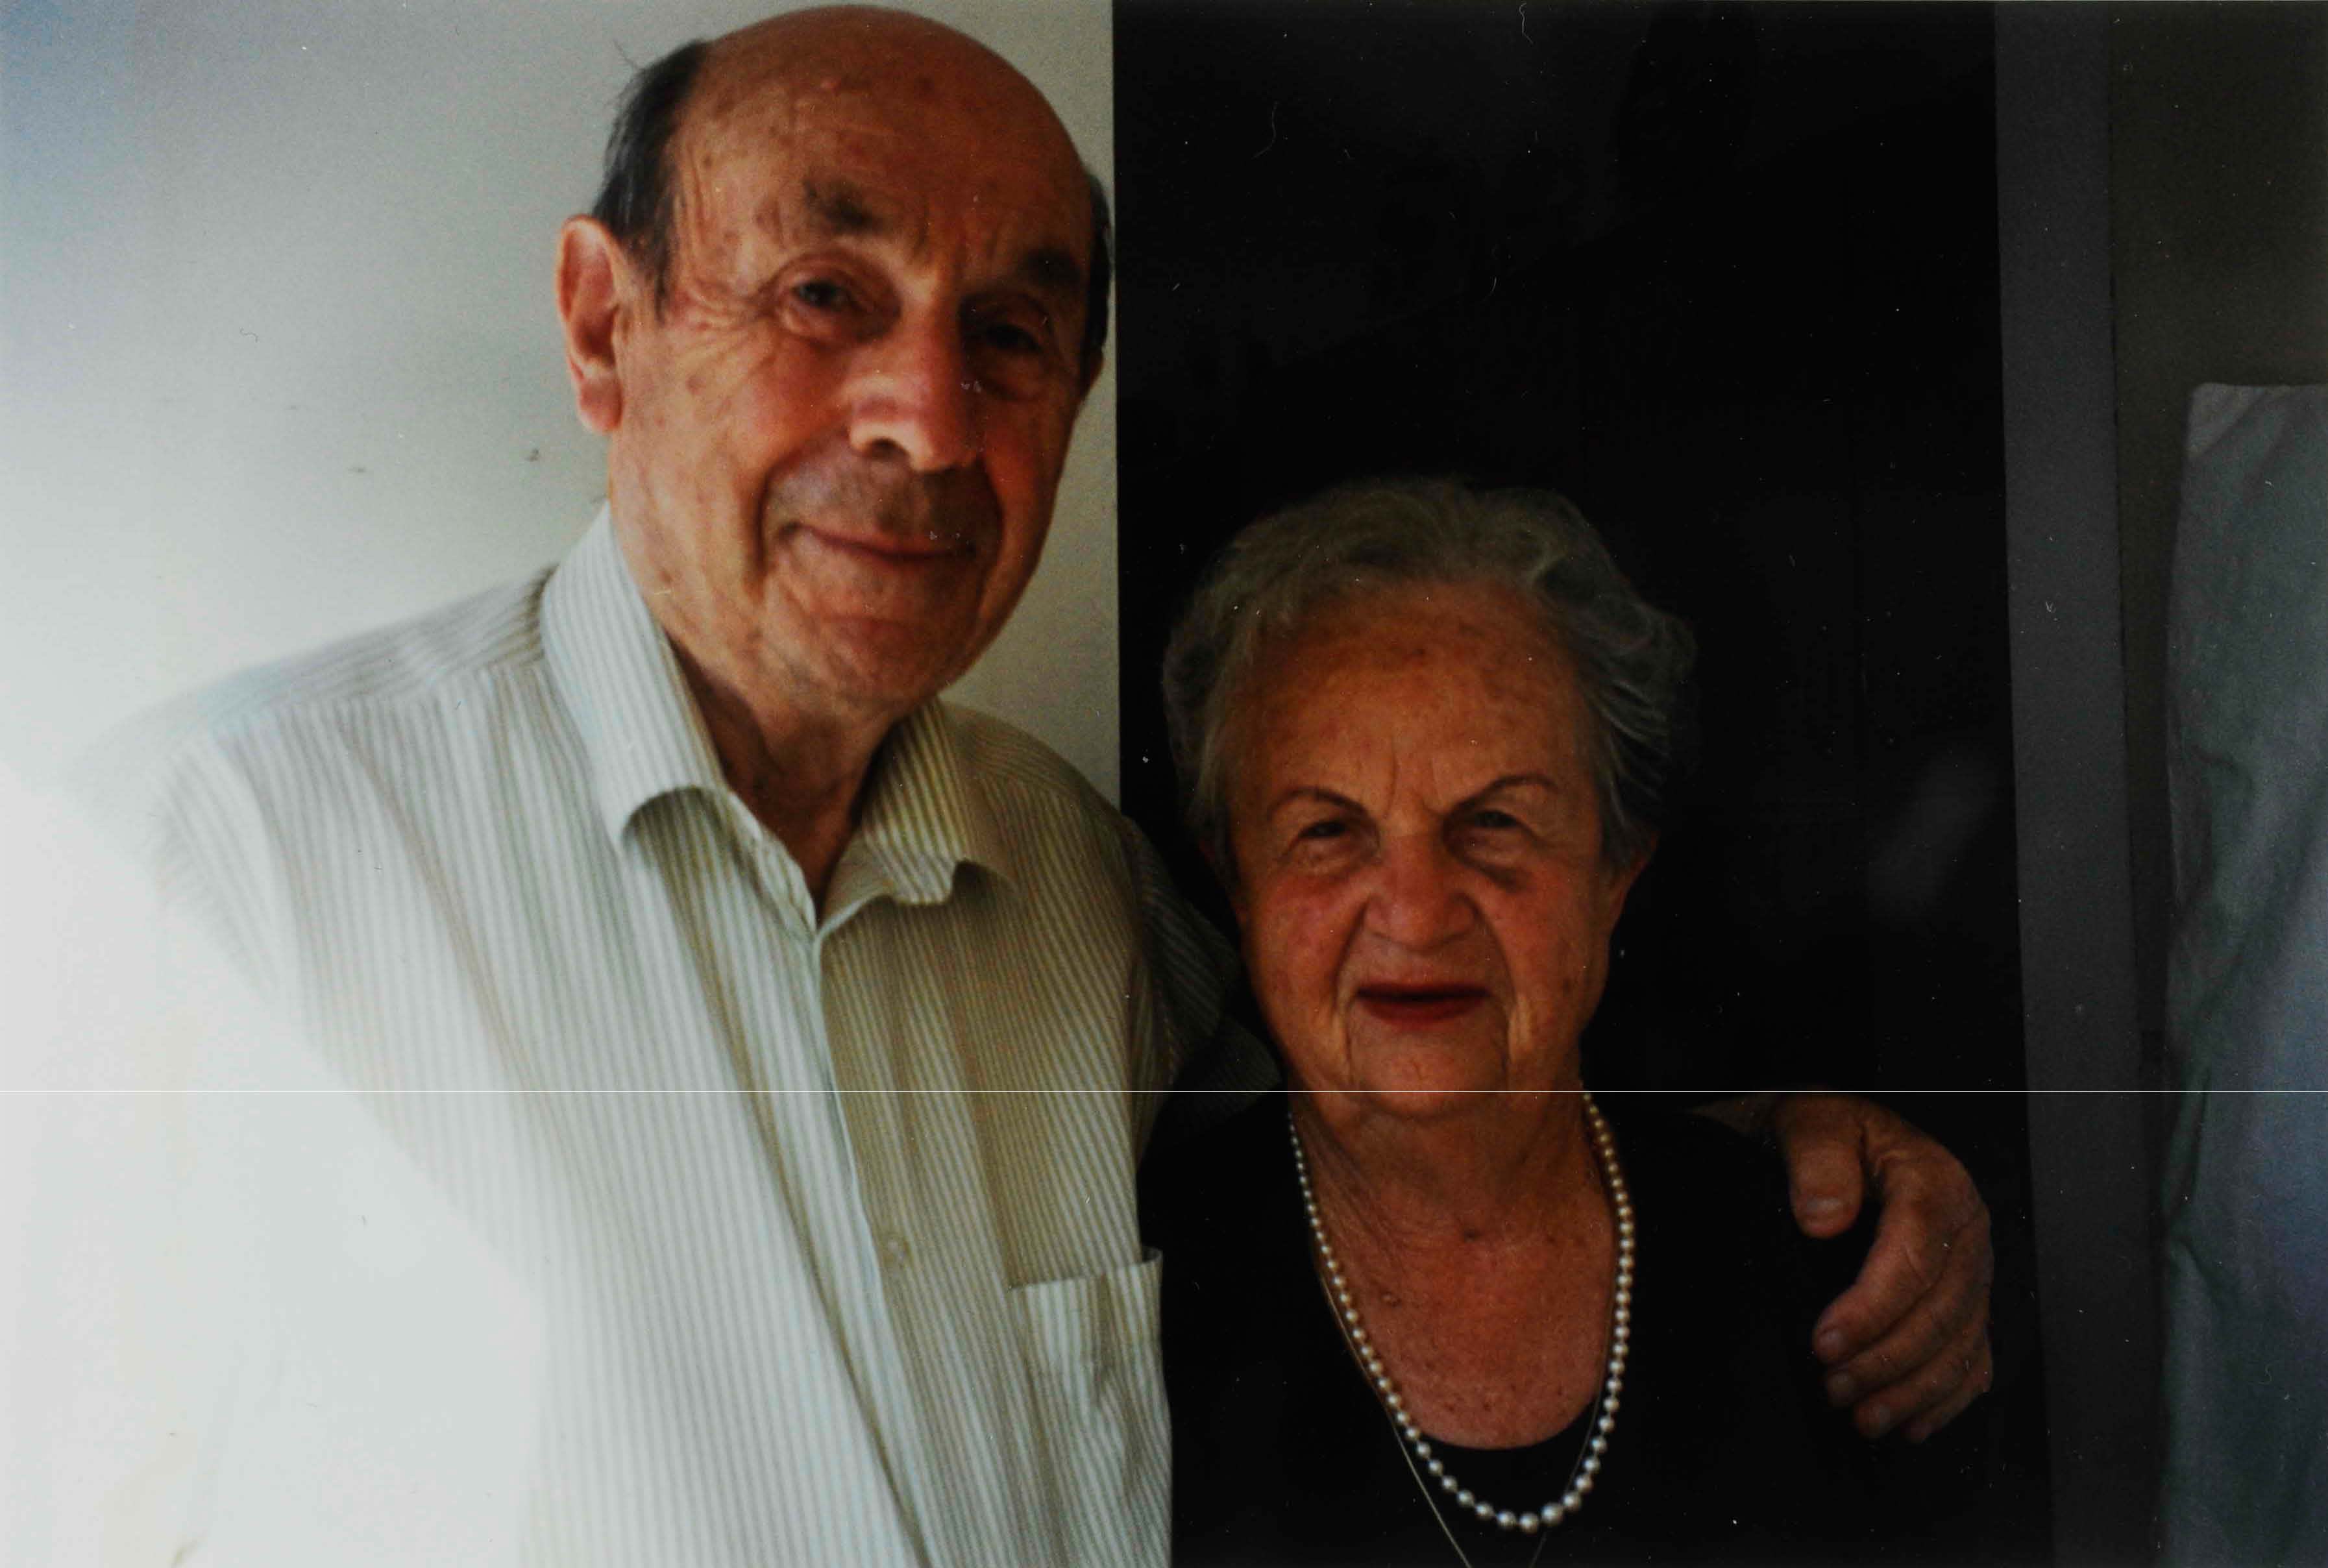 The survivor Hasia Geselevich with her husband